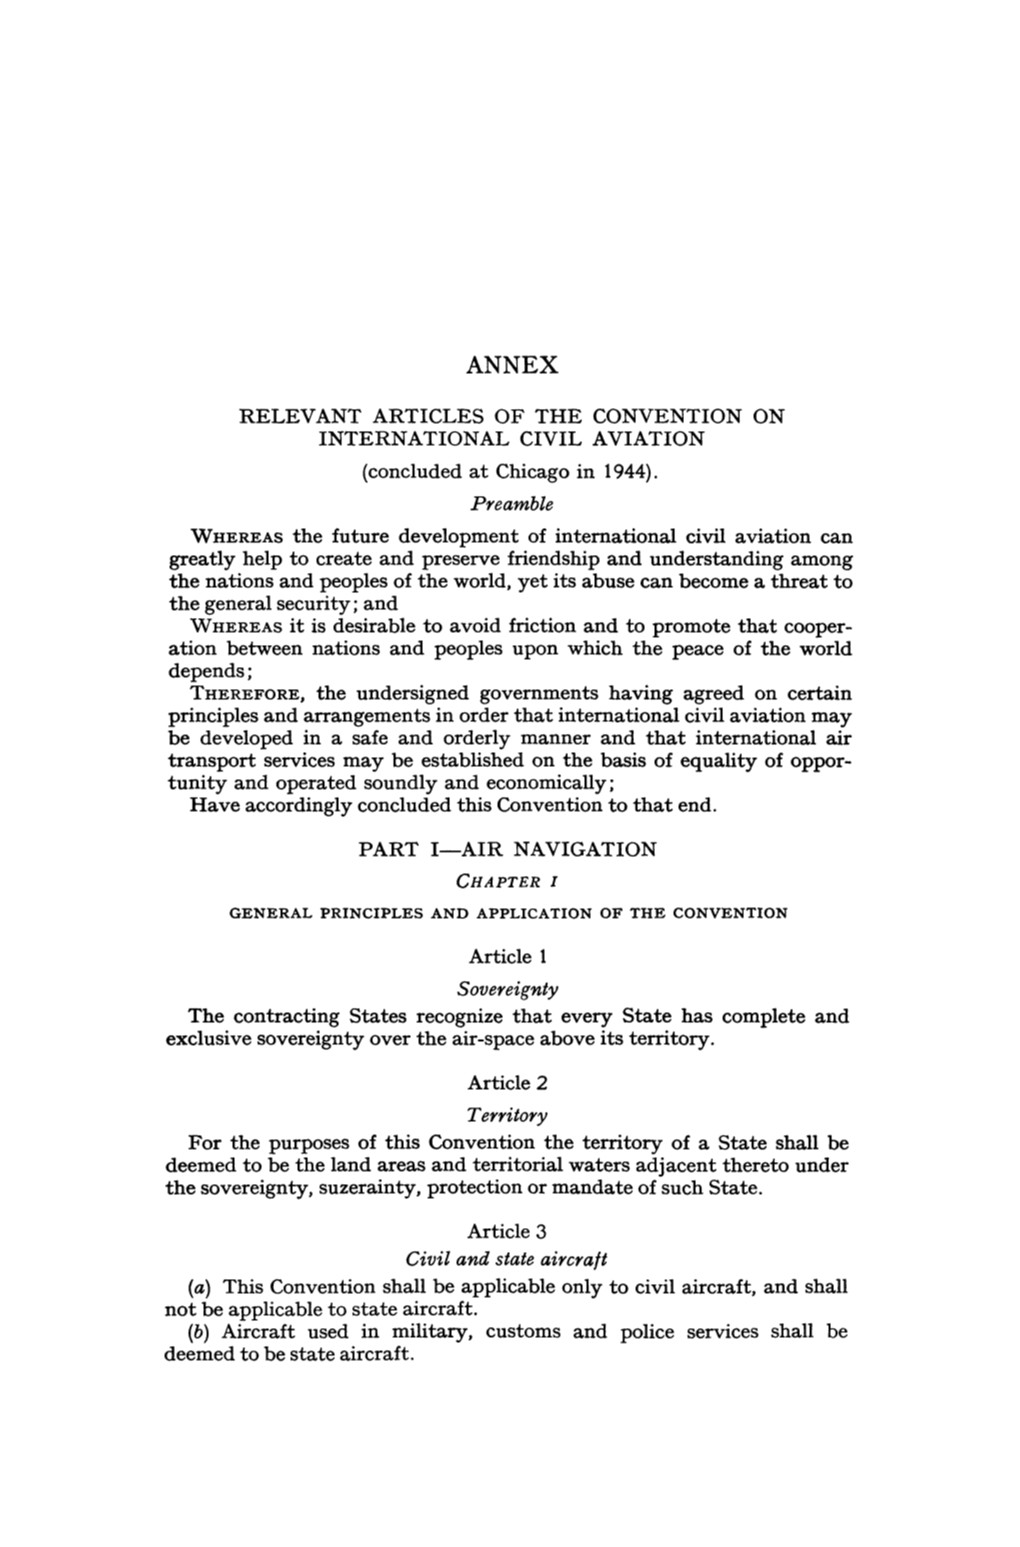 RELEVANT ARTICLES of the CONVENTION on INTERNATIONAL CIVIL AVIATION (Conc1uded at Chicago in 1944)